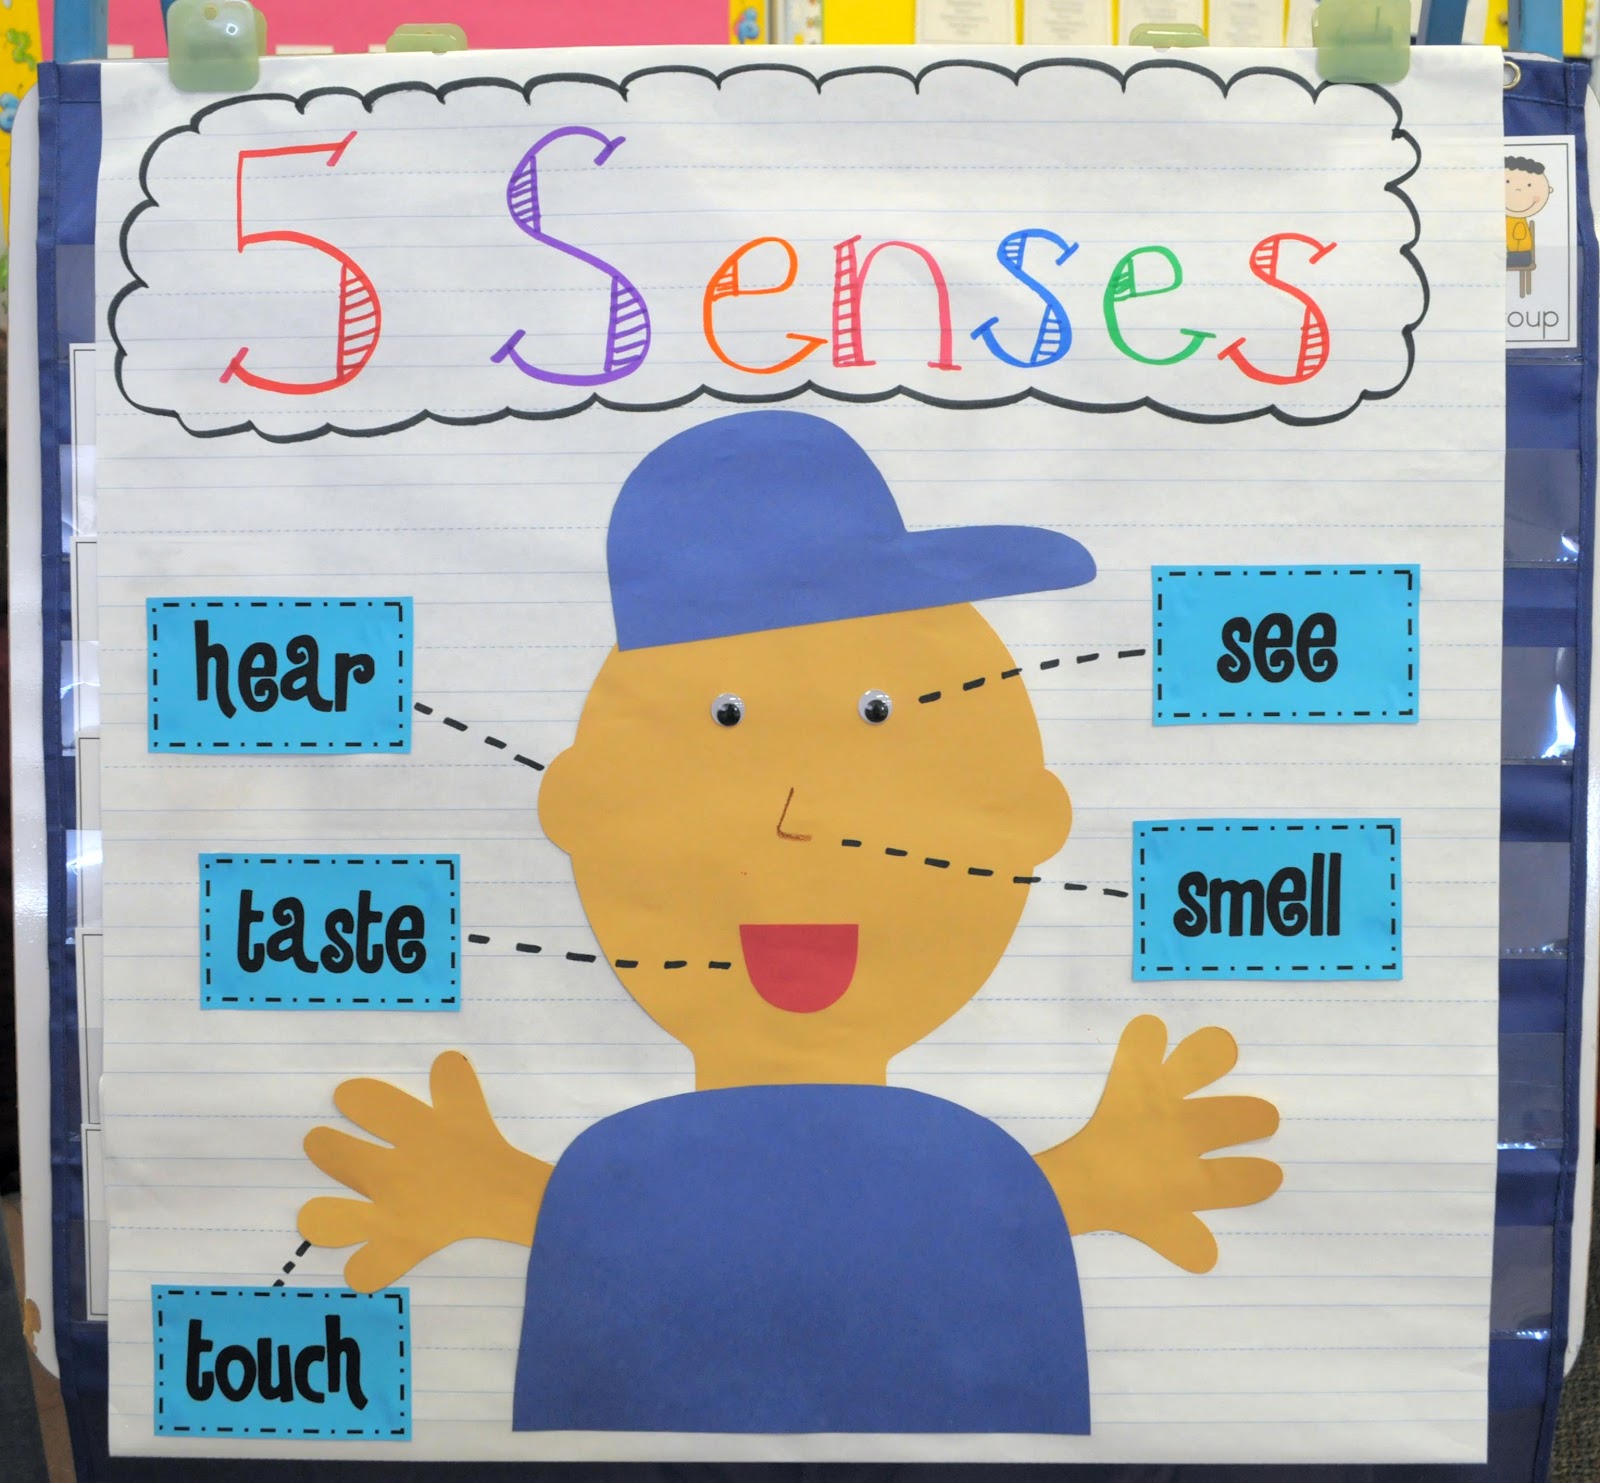 worksheets in I helped five kids chart spanish  senses.  prepped of a senses me Then  five the label the